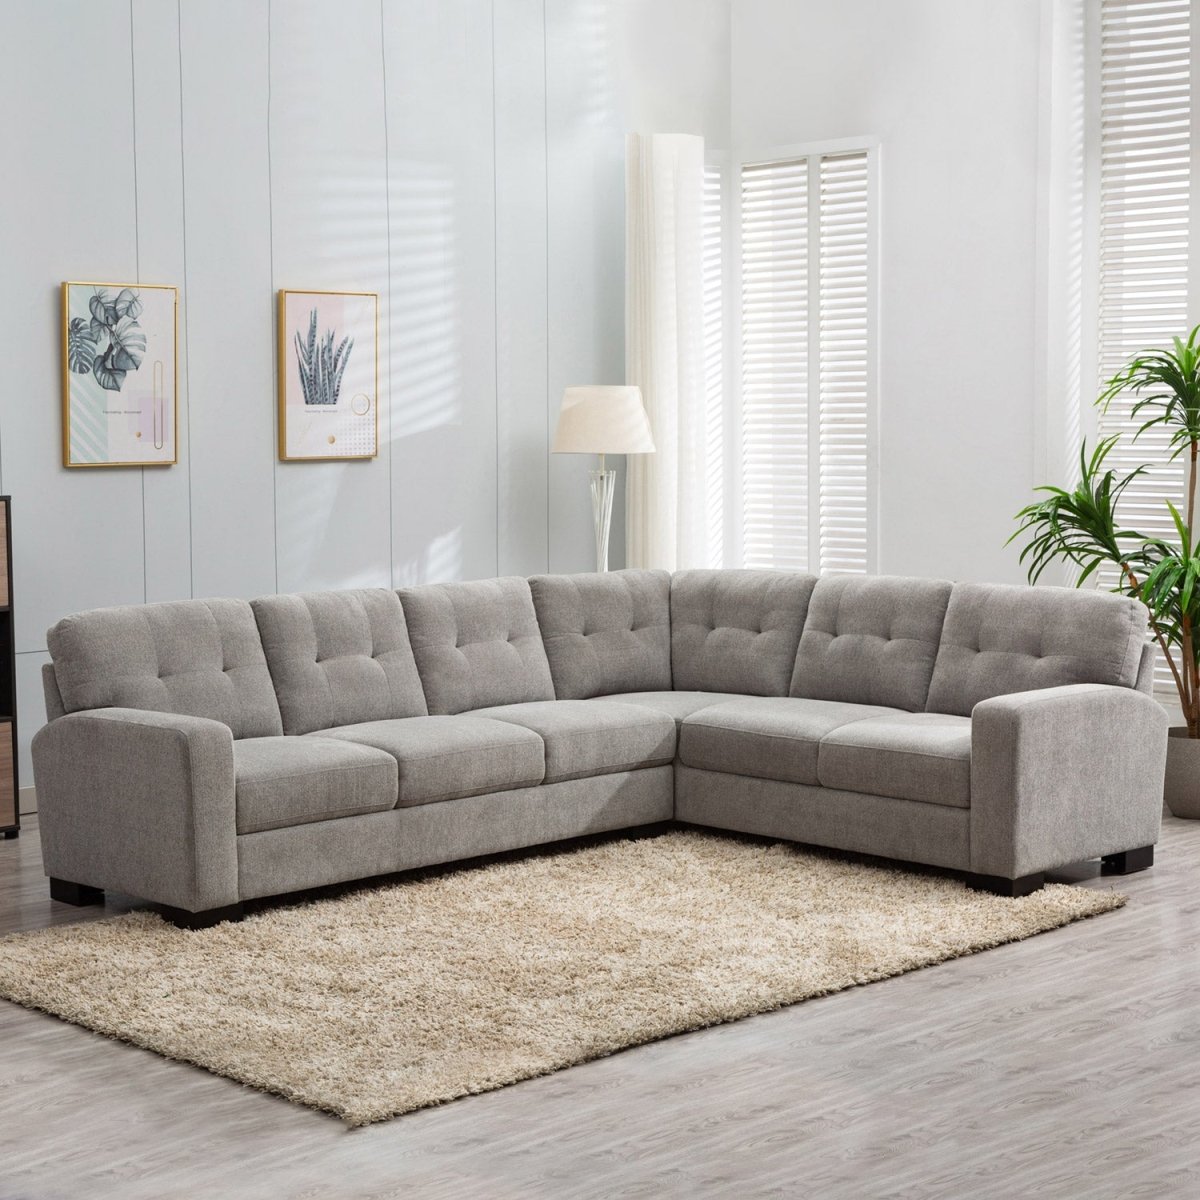 Annadale Fabric Sectional - Alpine Outlets